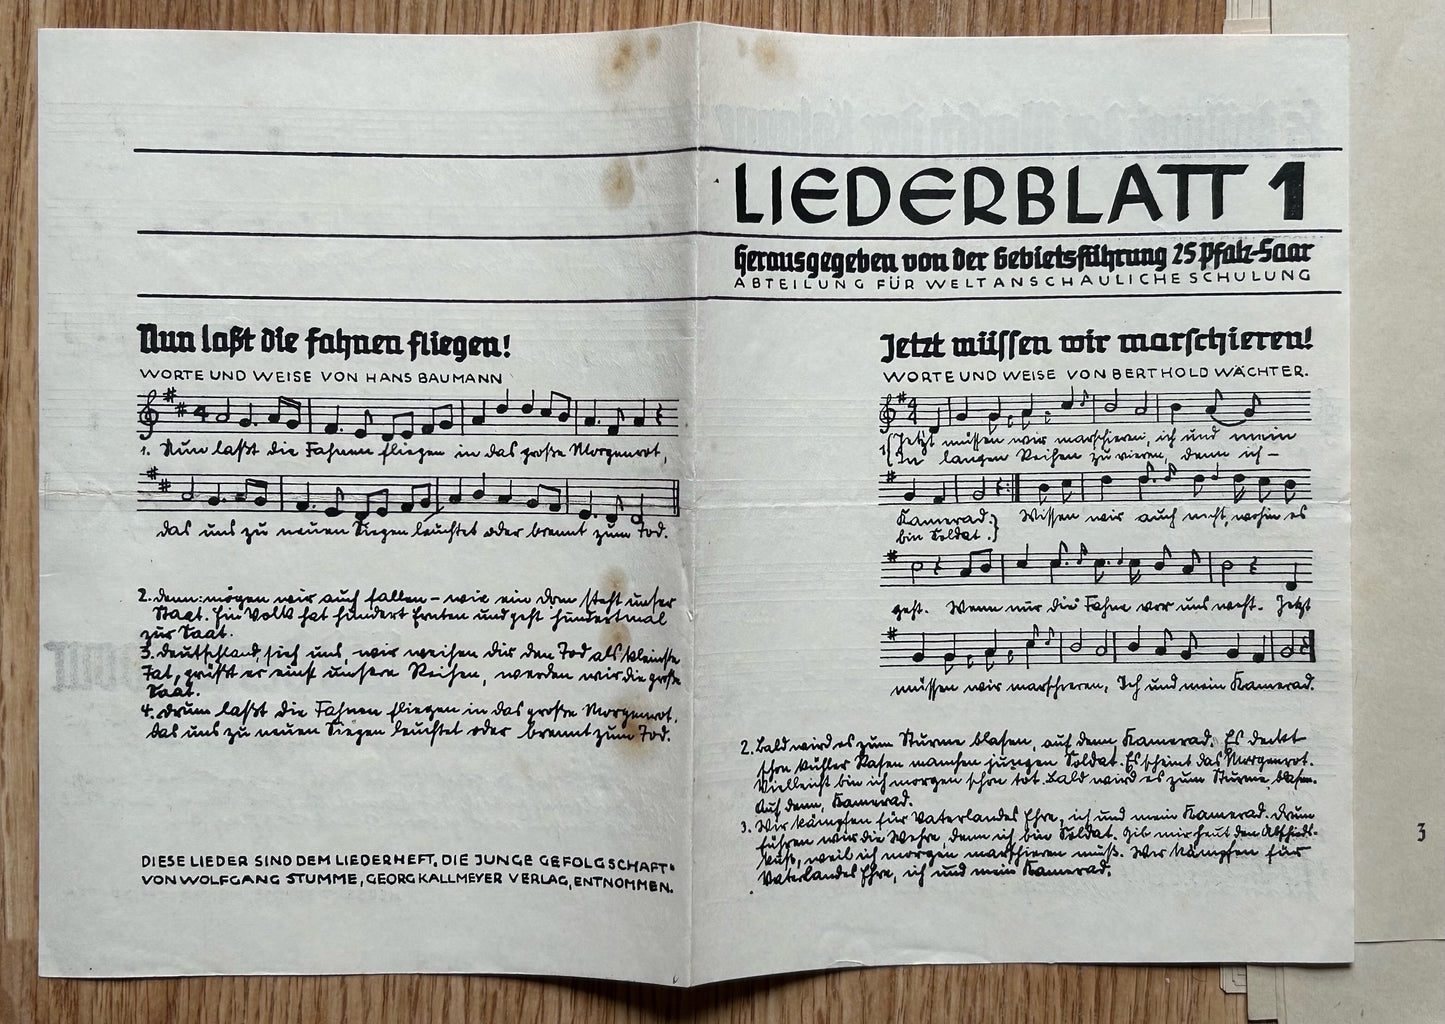 1935 folder of Third Reich youth song sheets